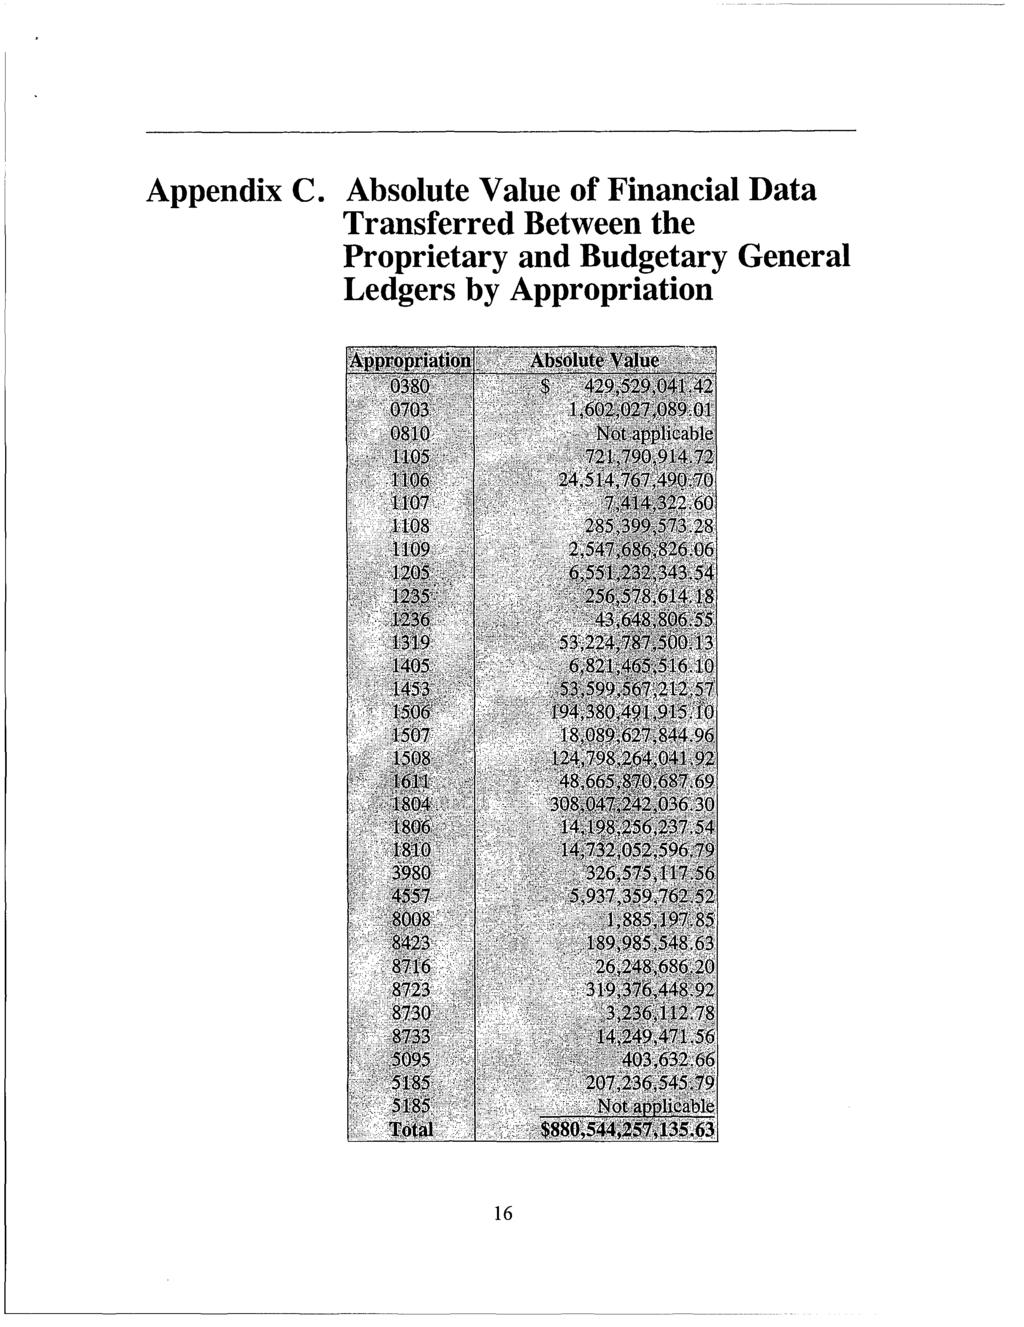 Appendix C. Absolute Value of Financial Data Transferred Between the Proprietary and Budgetary General Ledgers by Appropriation Oro 9riatio'i -Absolute VaJiue 0380 S '429,52Q041.